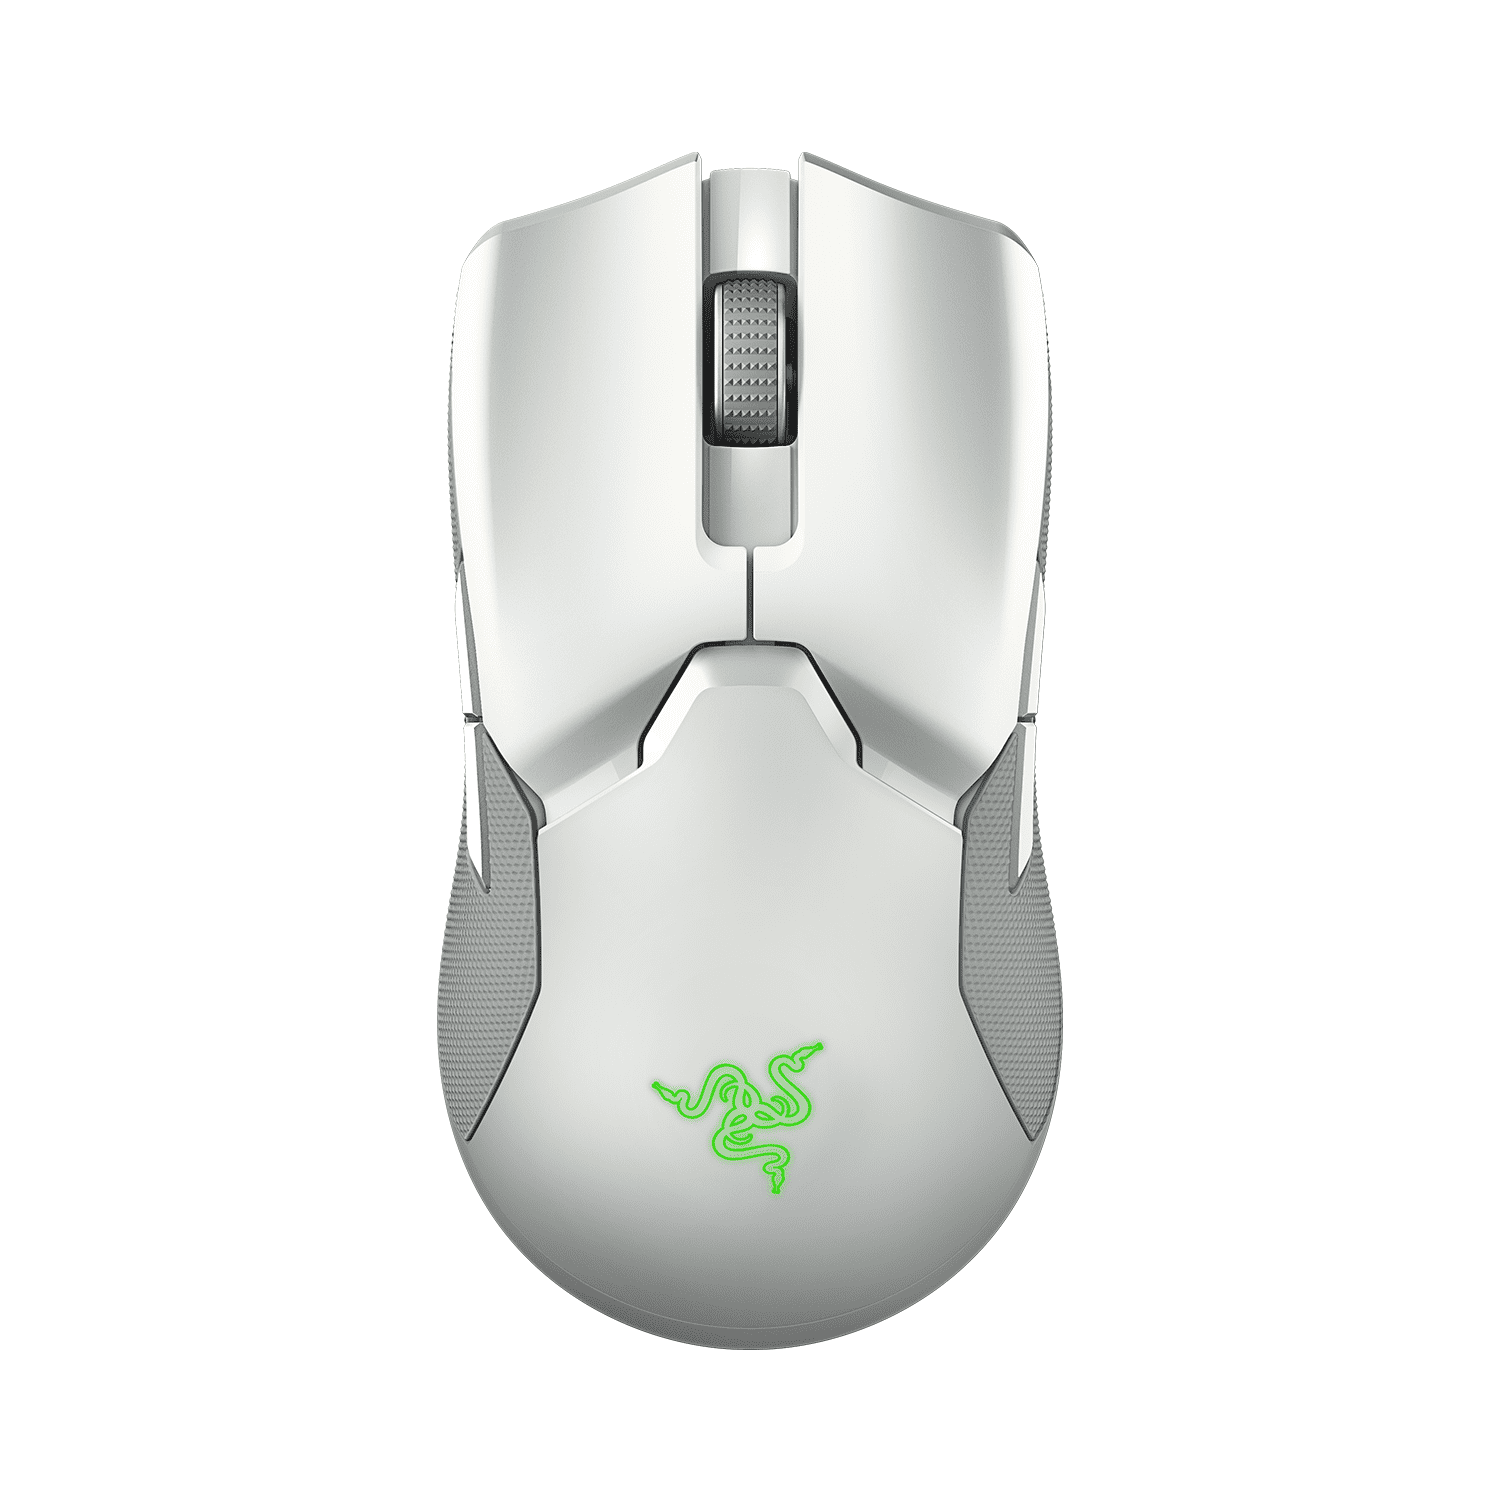 Razer Viper Ultimate Lightweight Wireless Gaming Mouse & RGB 